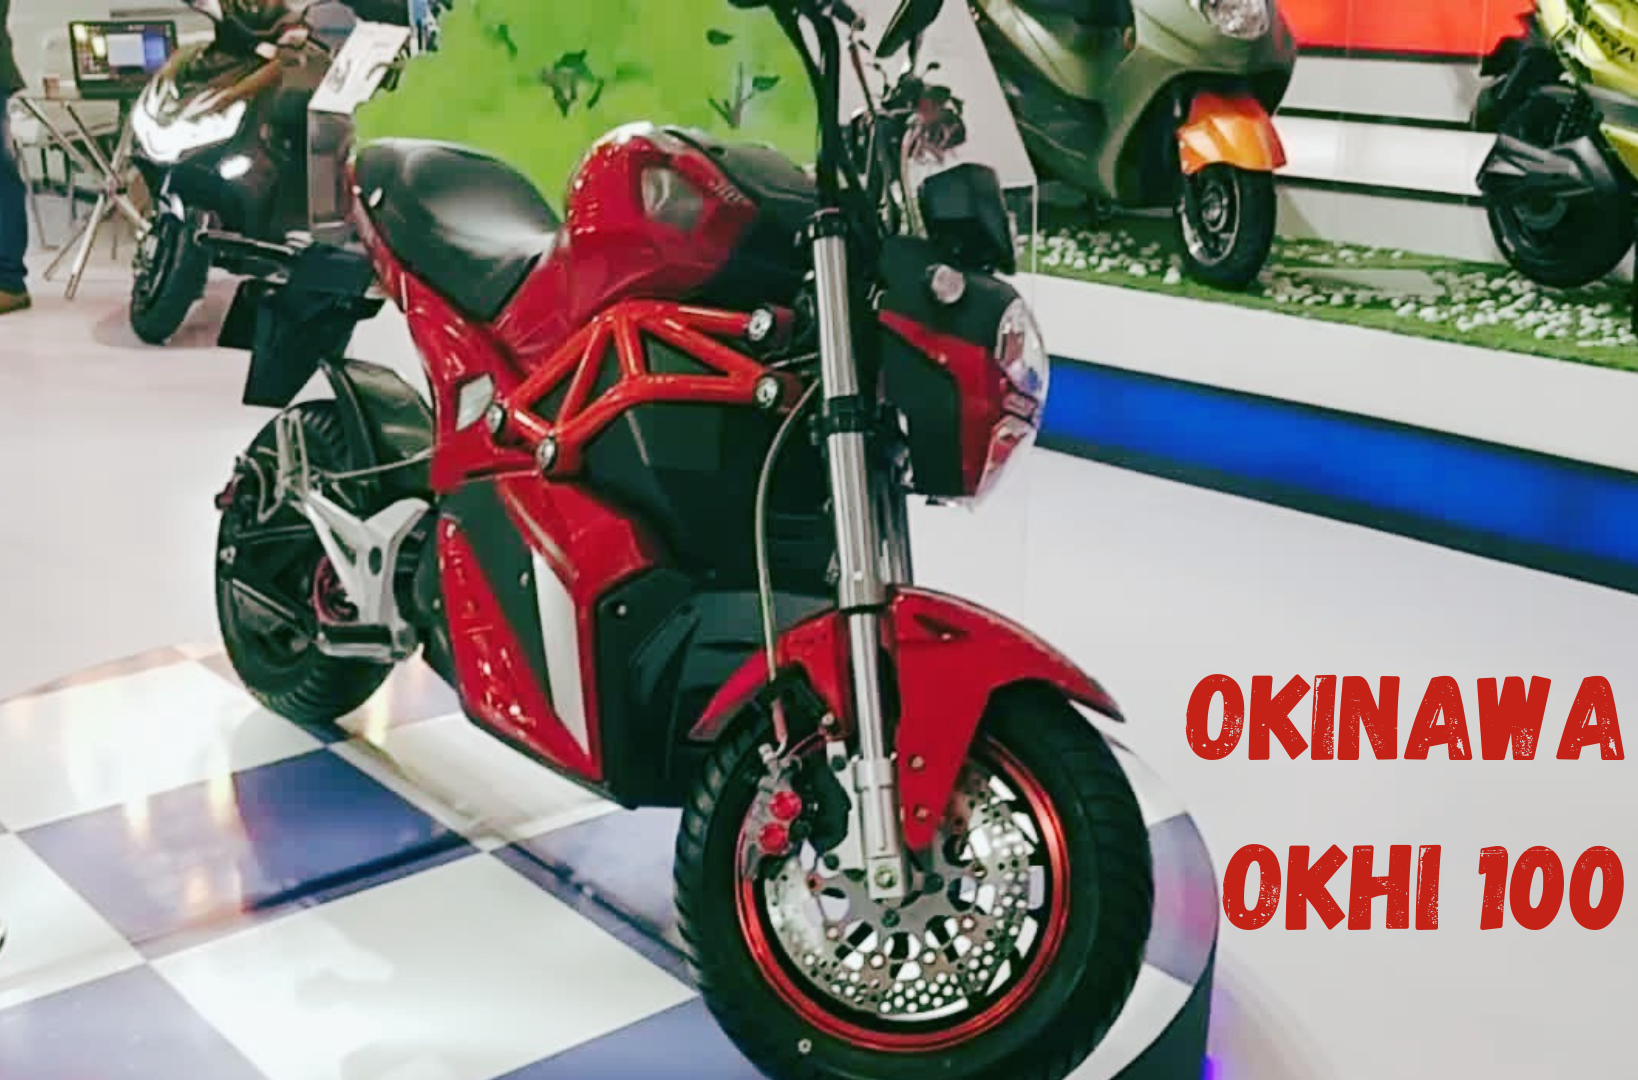 Okinawa OKHI 100 – Electric Motorcycle Estimated Price, Specs, Launch & Highlights